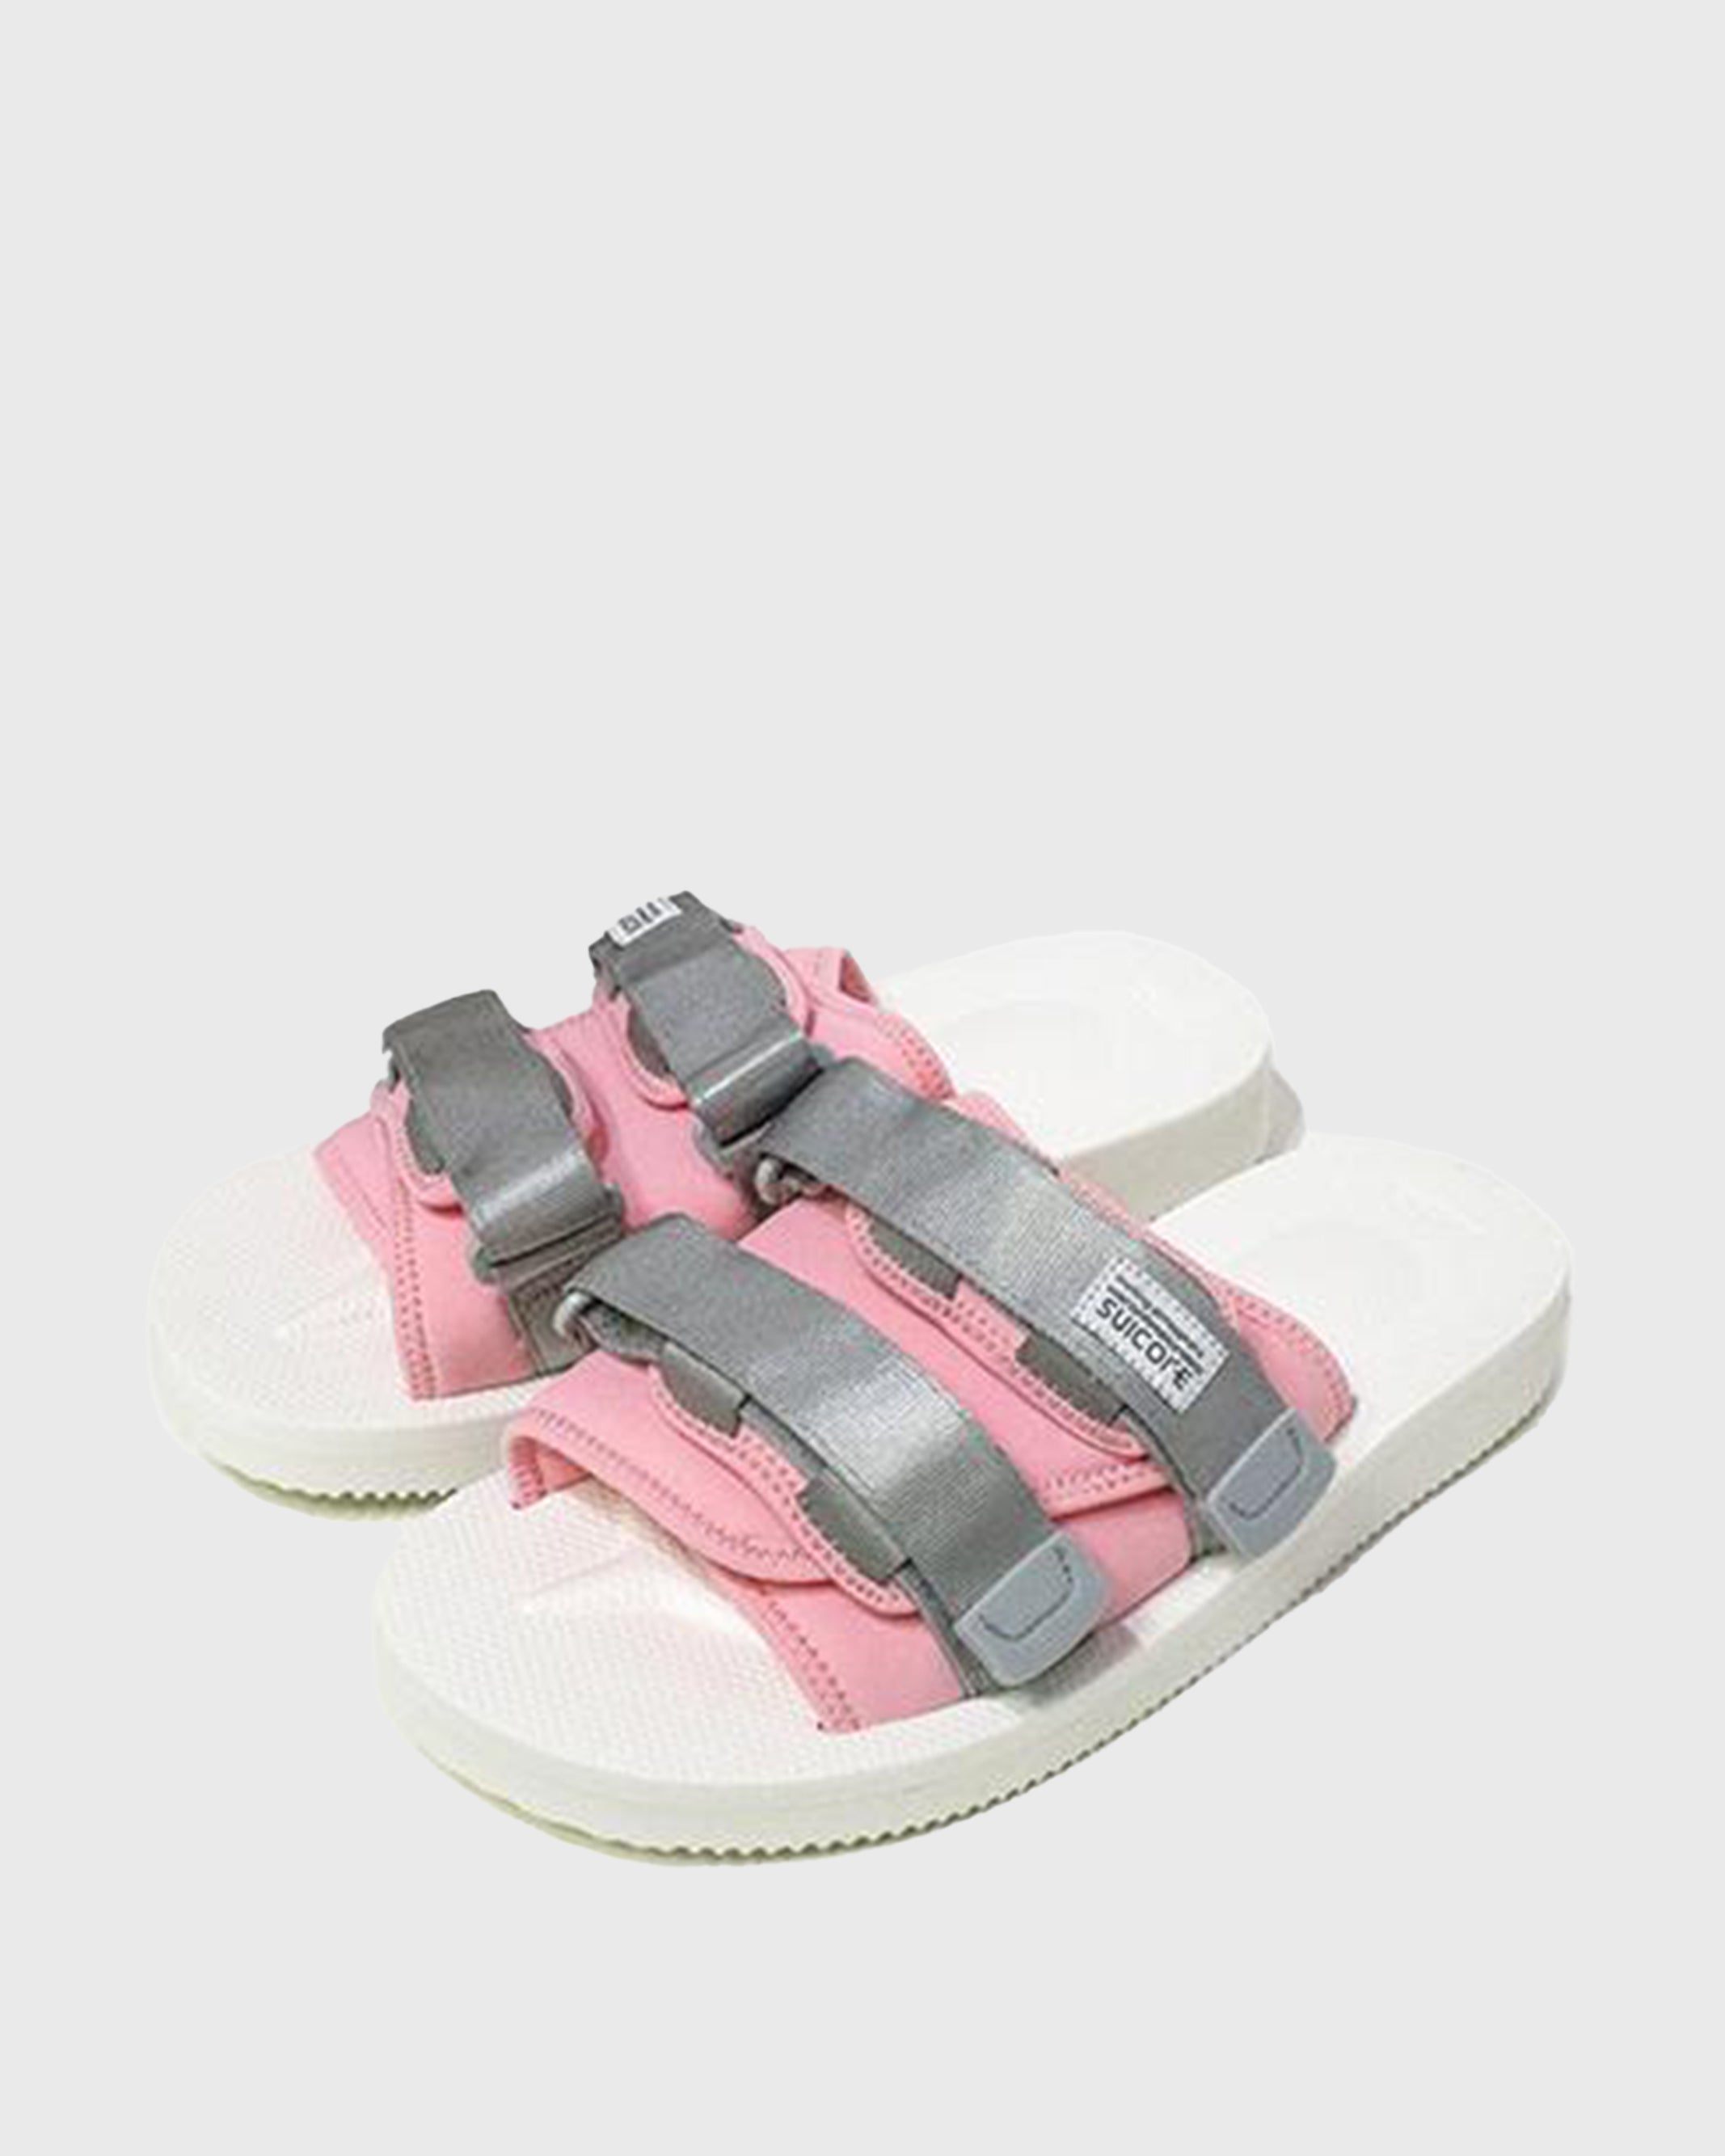 SUICOKE Web Exclusive Edition MOTO-Cab in Gray/White OG-056CABNAW | Shop from eightywingold an official brand partner for SUICOKE Canada and US.